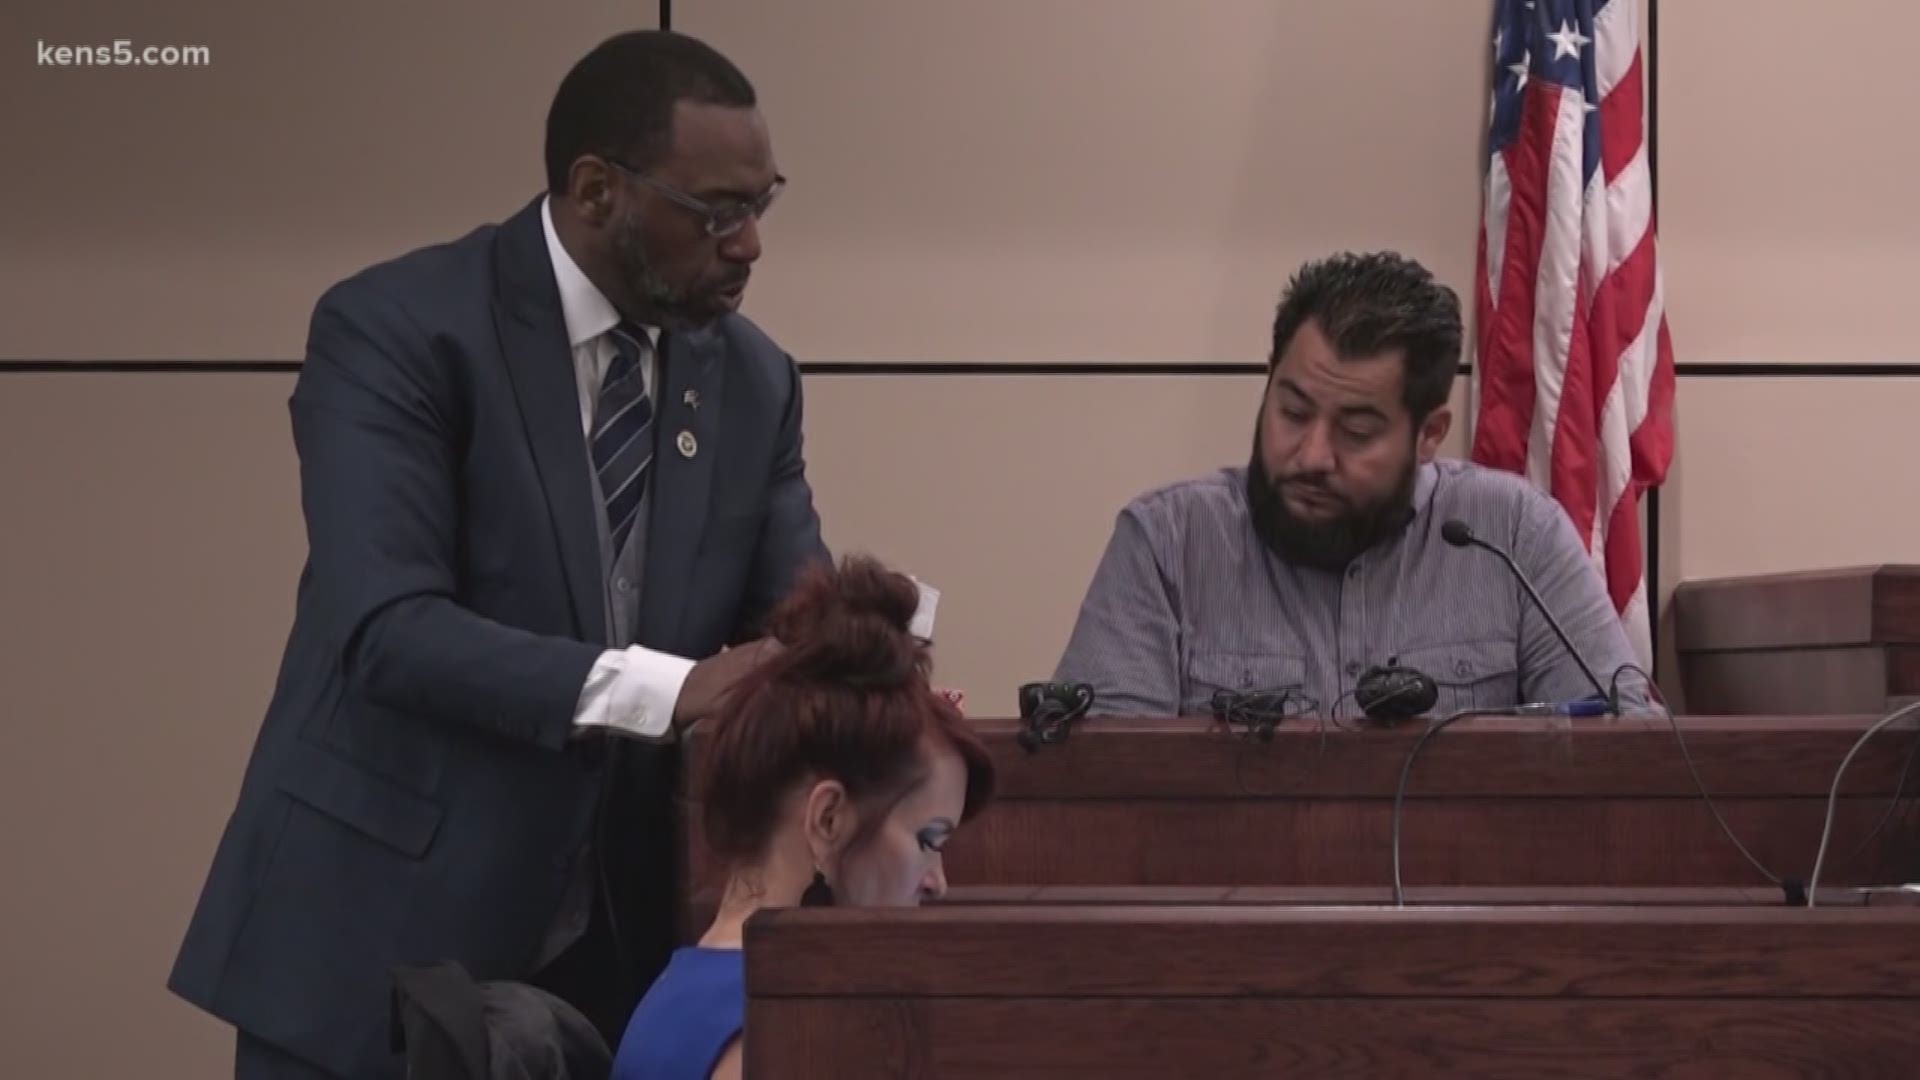 The trial begins for the accused "Medical Center Rapist." 20-year-old Anton Harris is accused of targeting, assaulting, and robbing several women in 2016 and 2017.